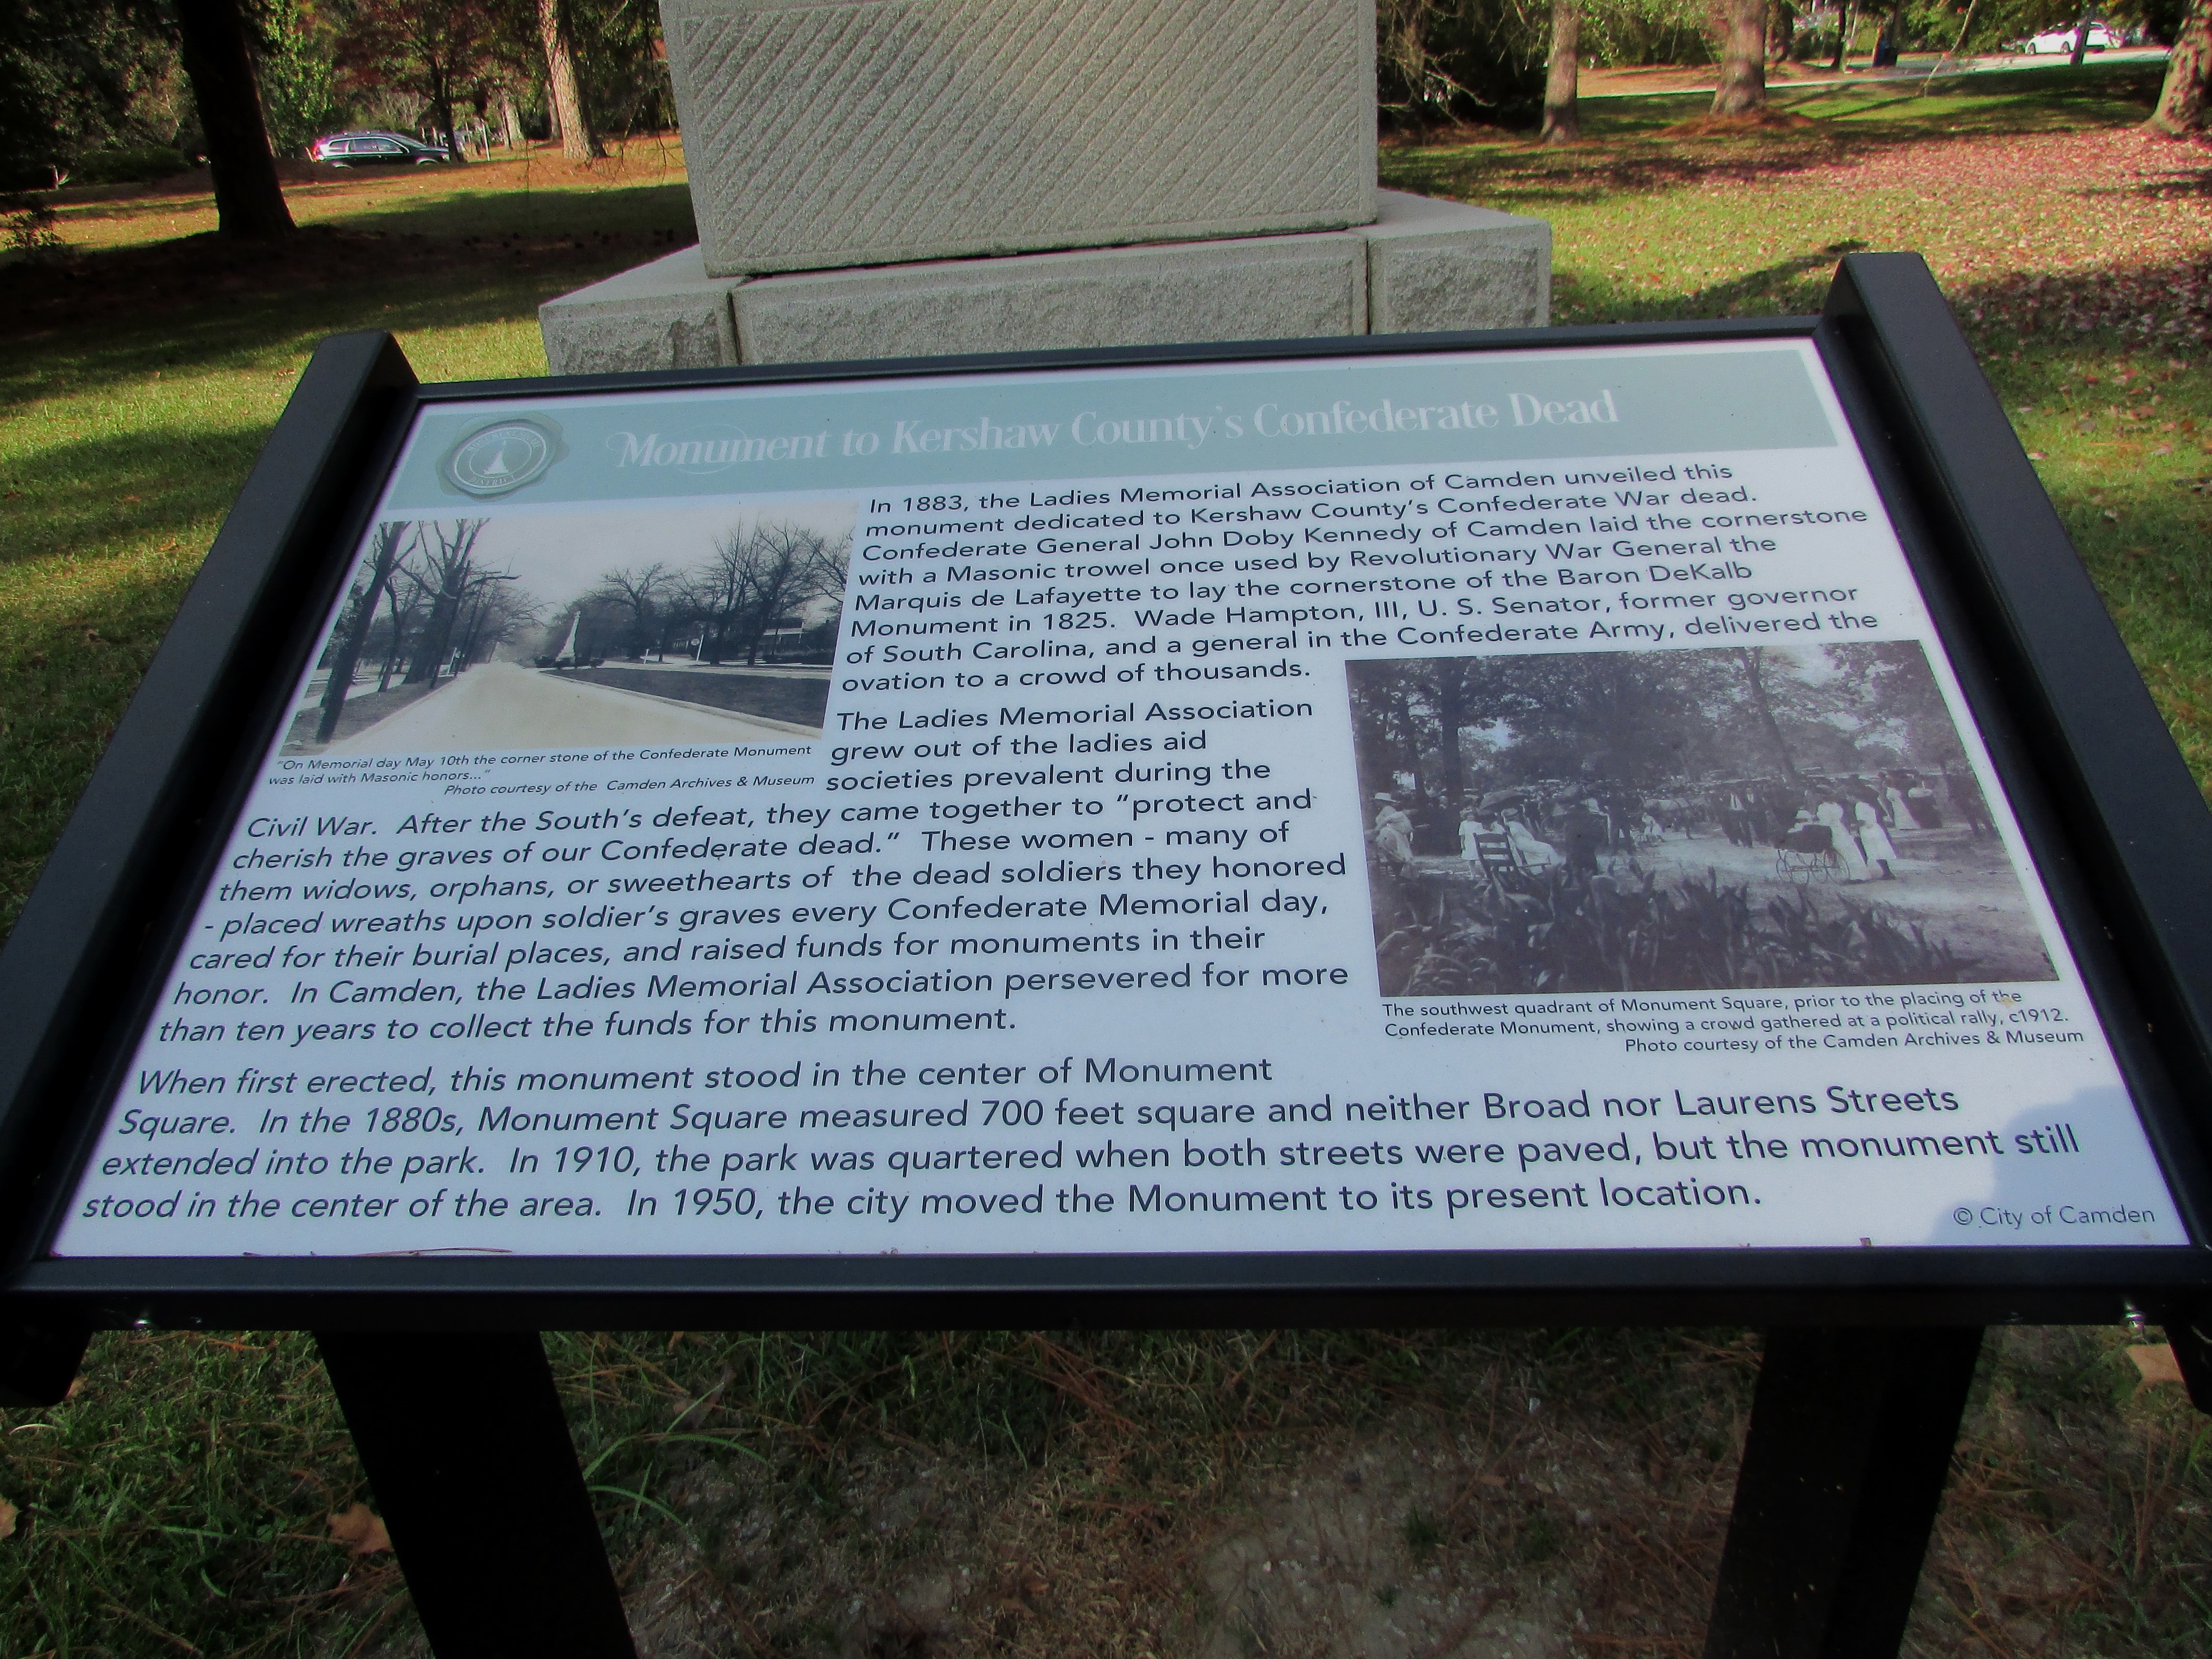 Monument to Kershaw County’s Confederate Dead Marker